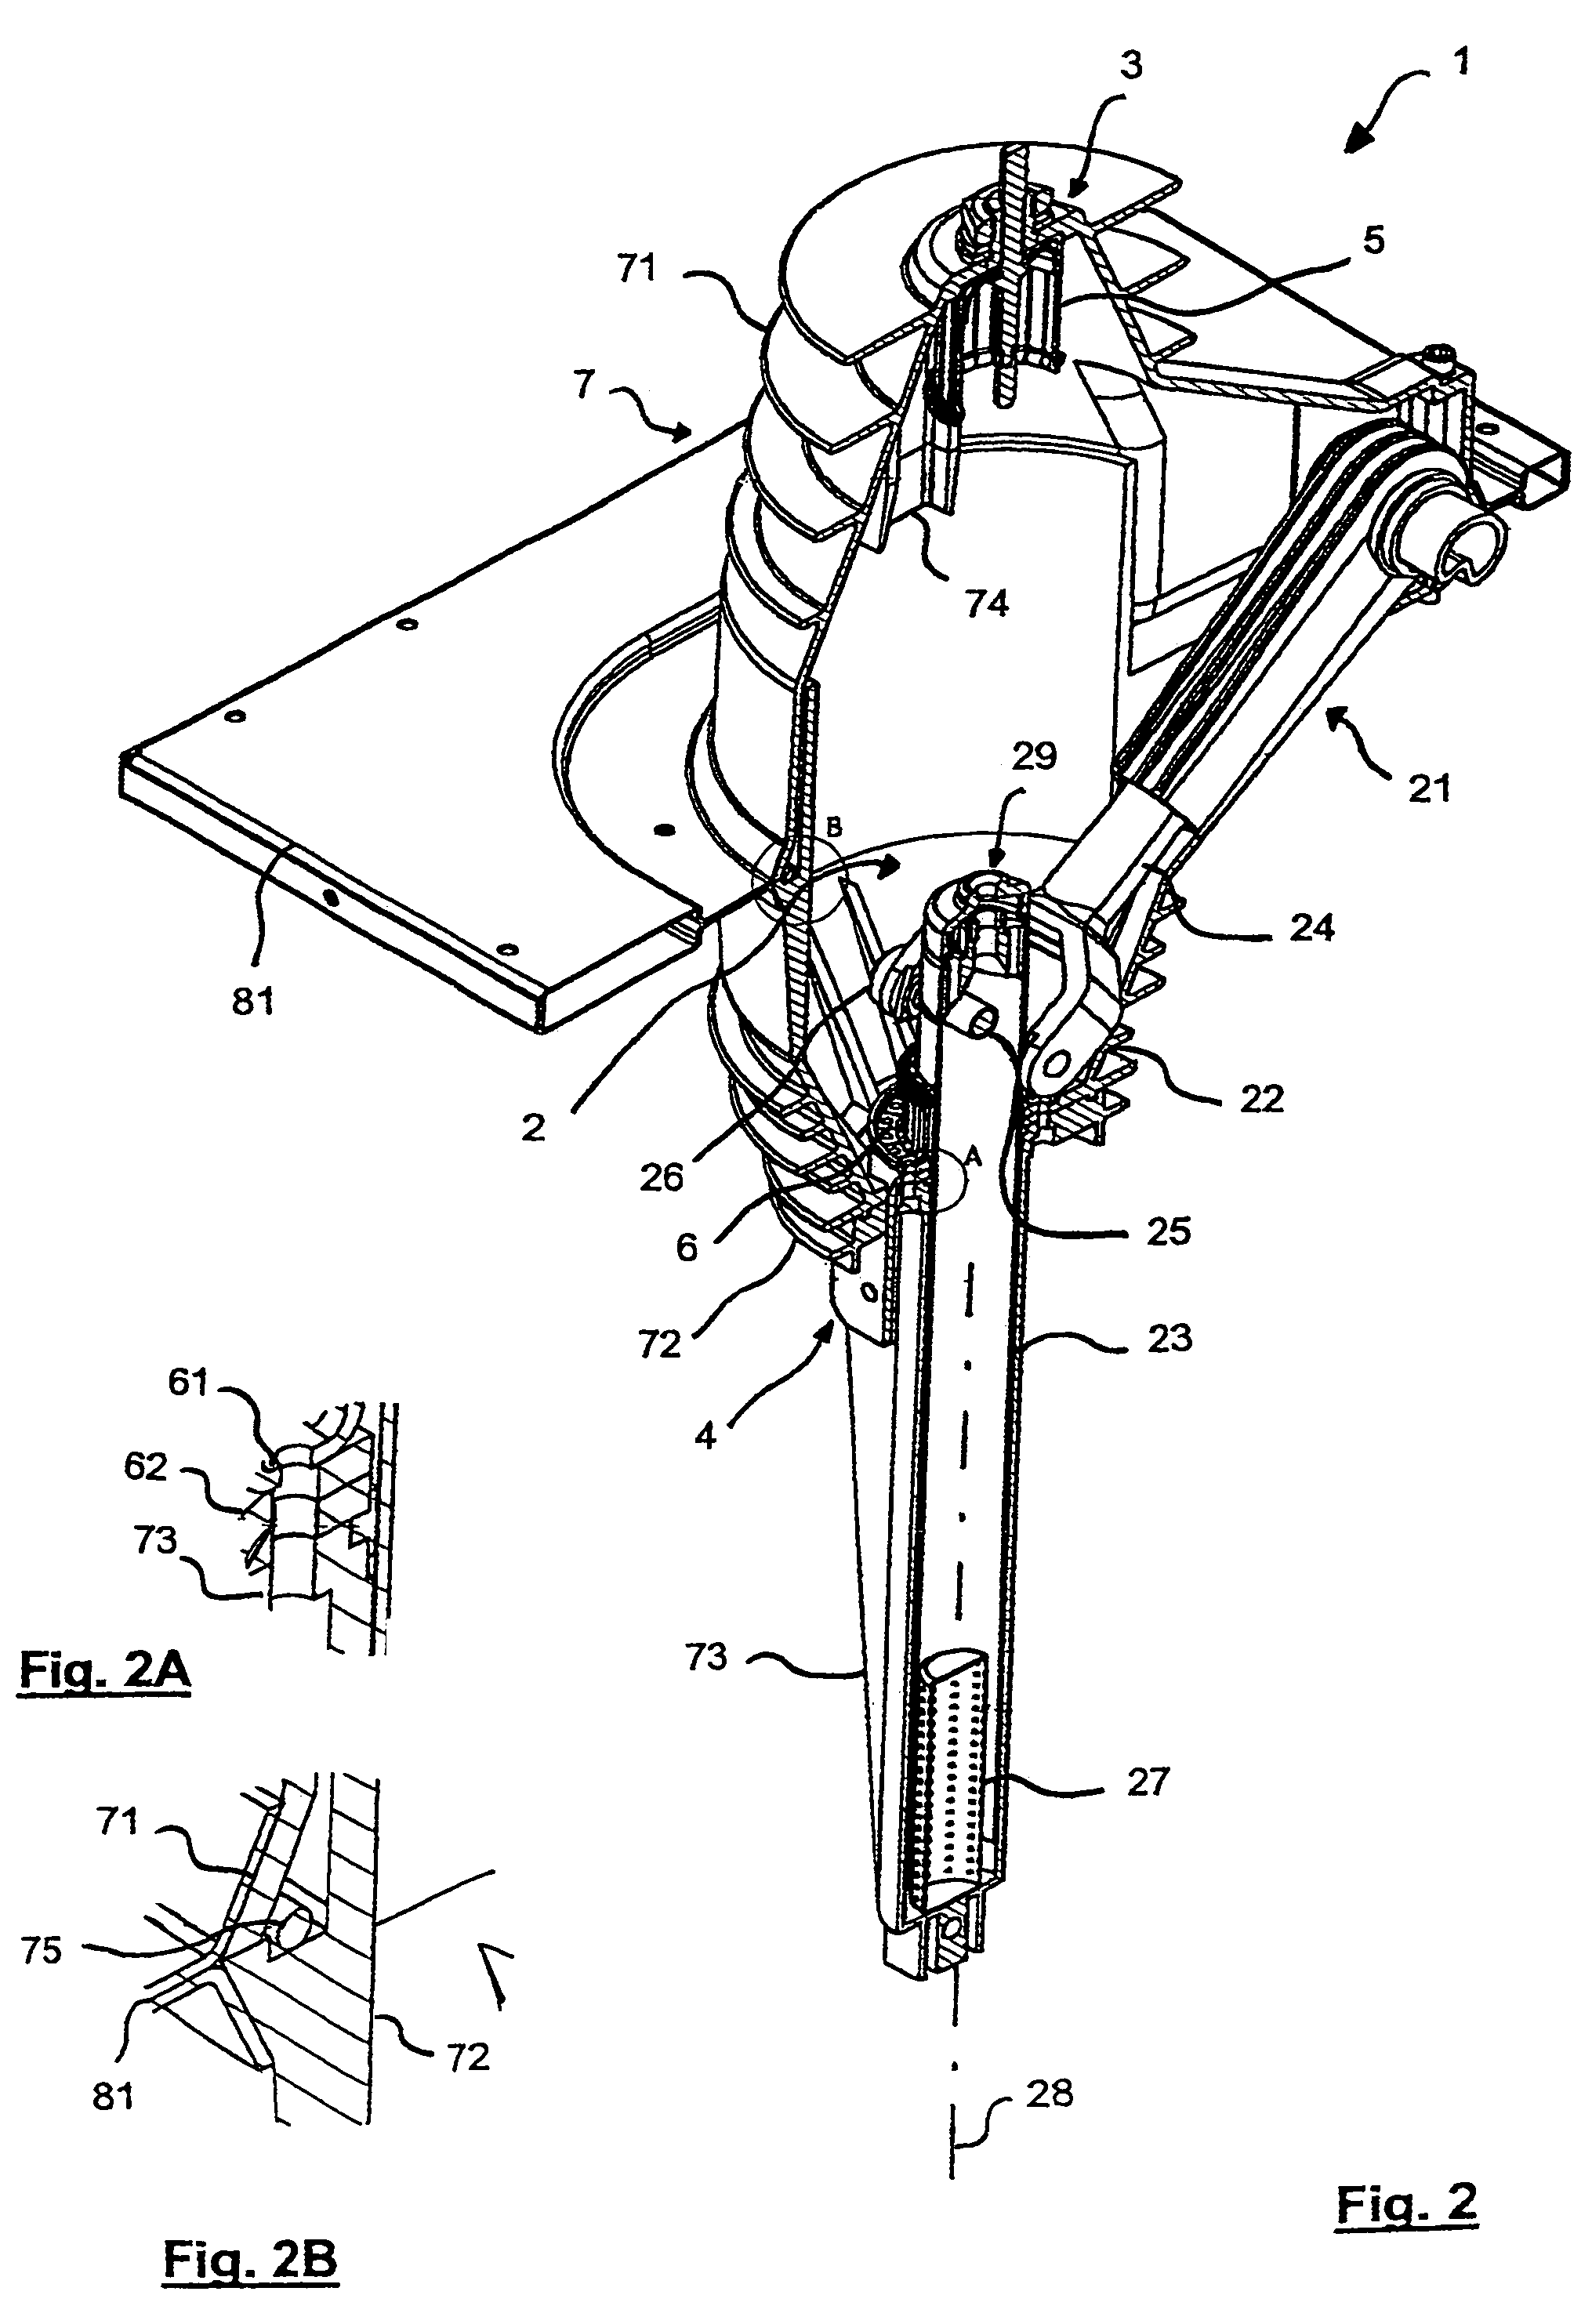 Switch and disconnector apparatus for electric substations